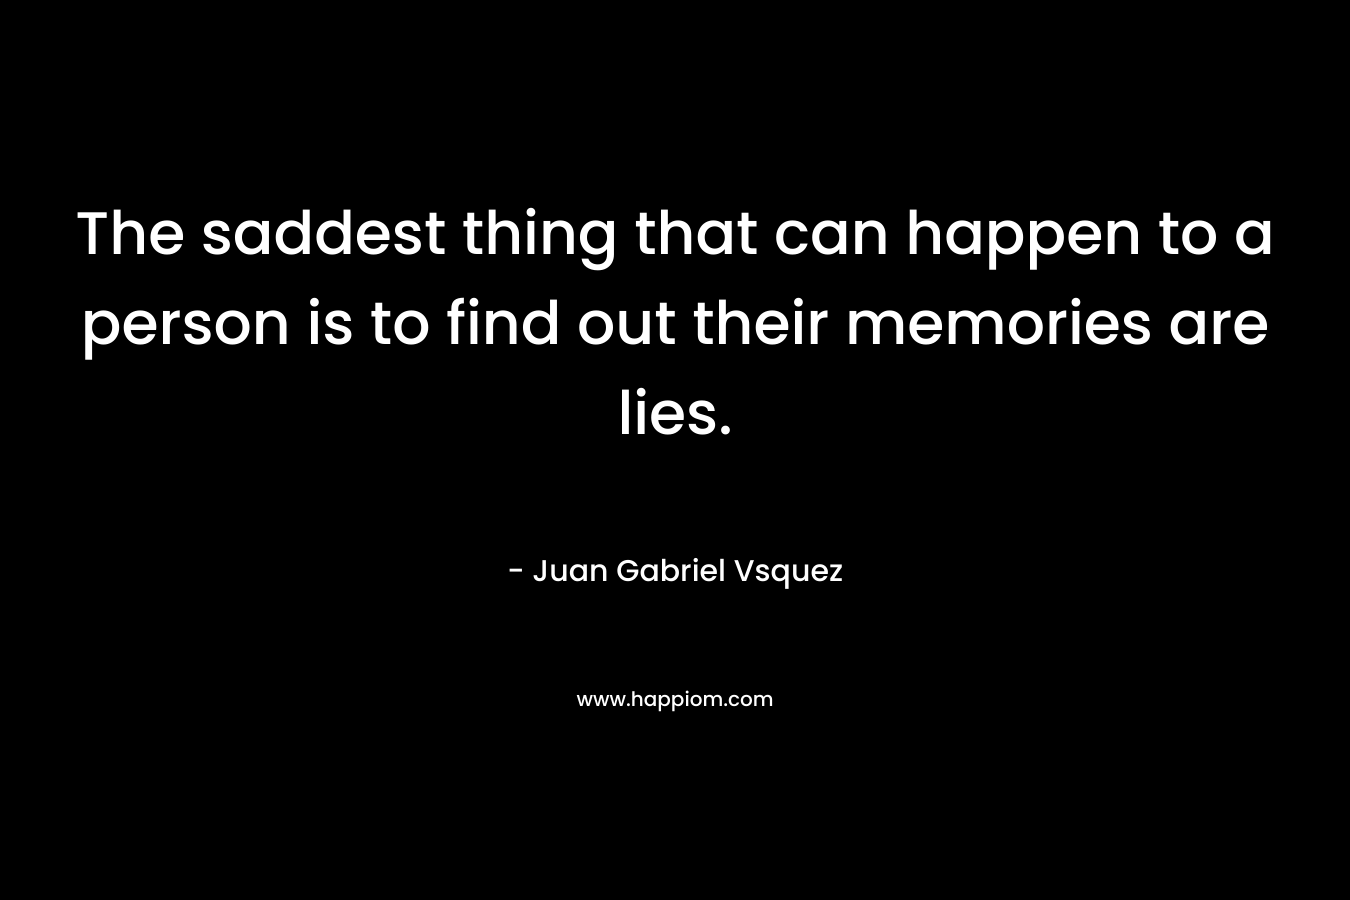 The saddest thing that can happen to a person is to find out their memories are lies. – Juan Gabriel Vsquez